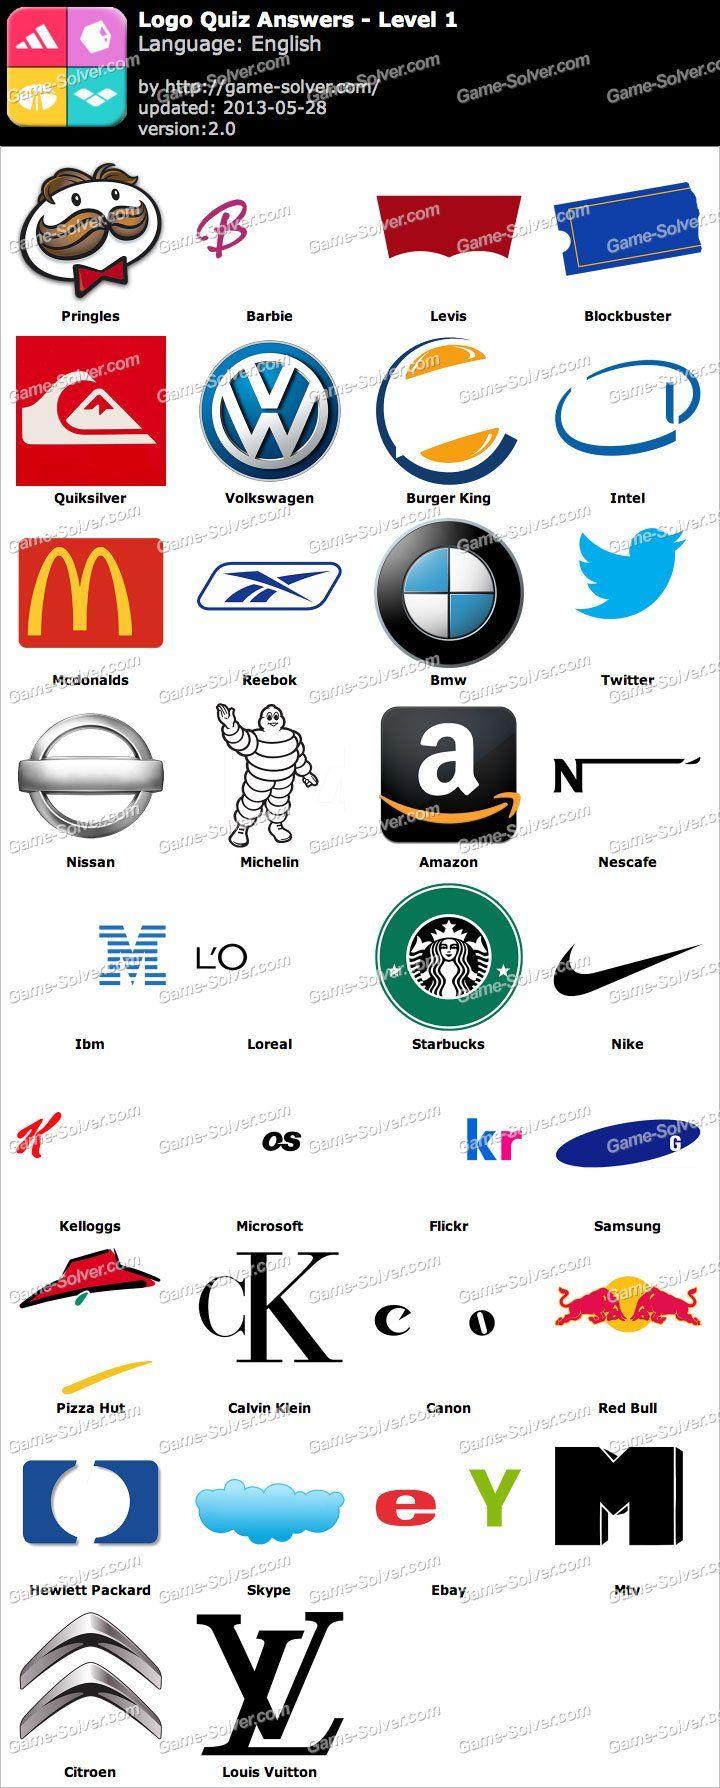 Logos with RAC Guess Logo - 19 best Logoquiz images on Pinterest | Game logo, Puzzle and Logos